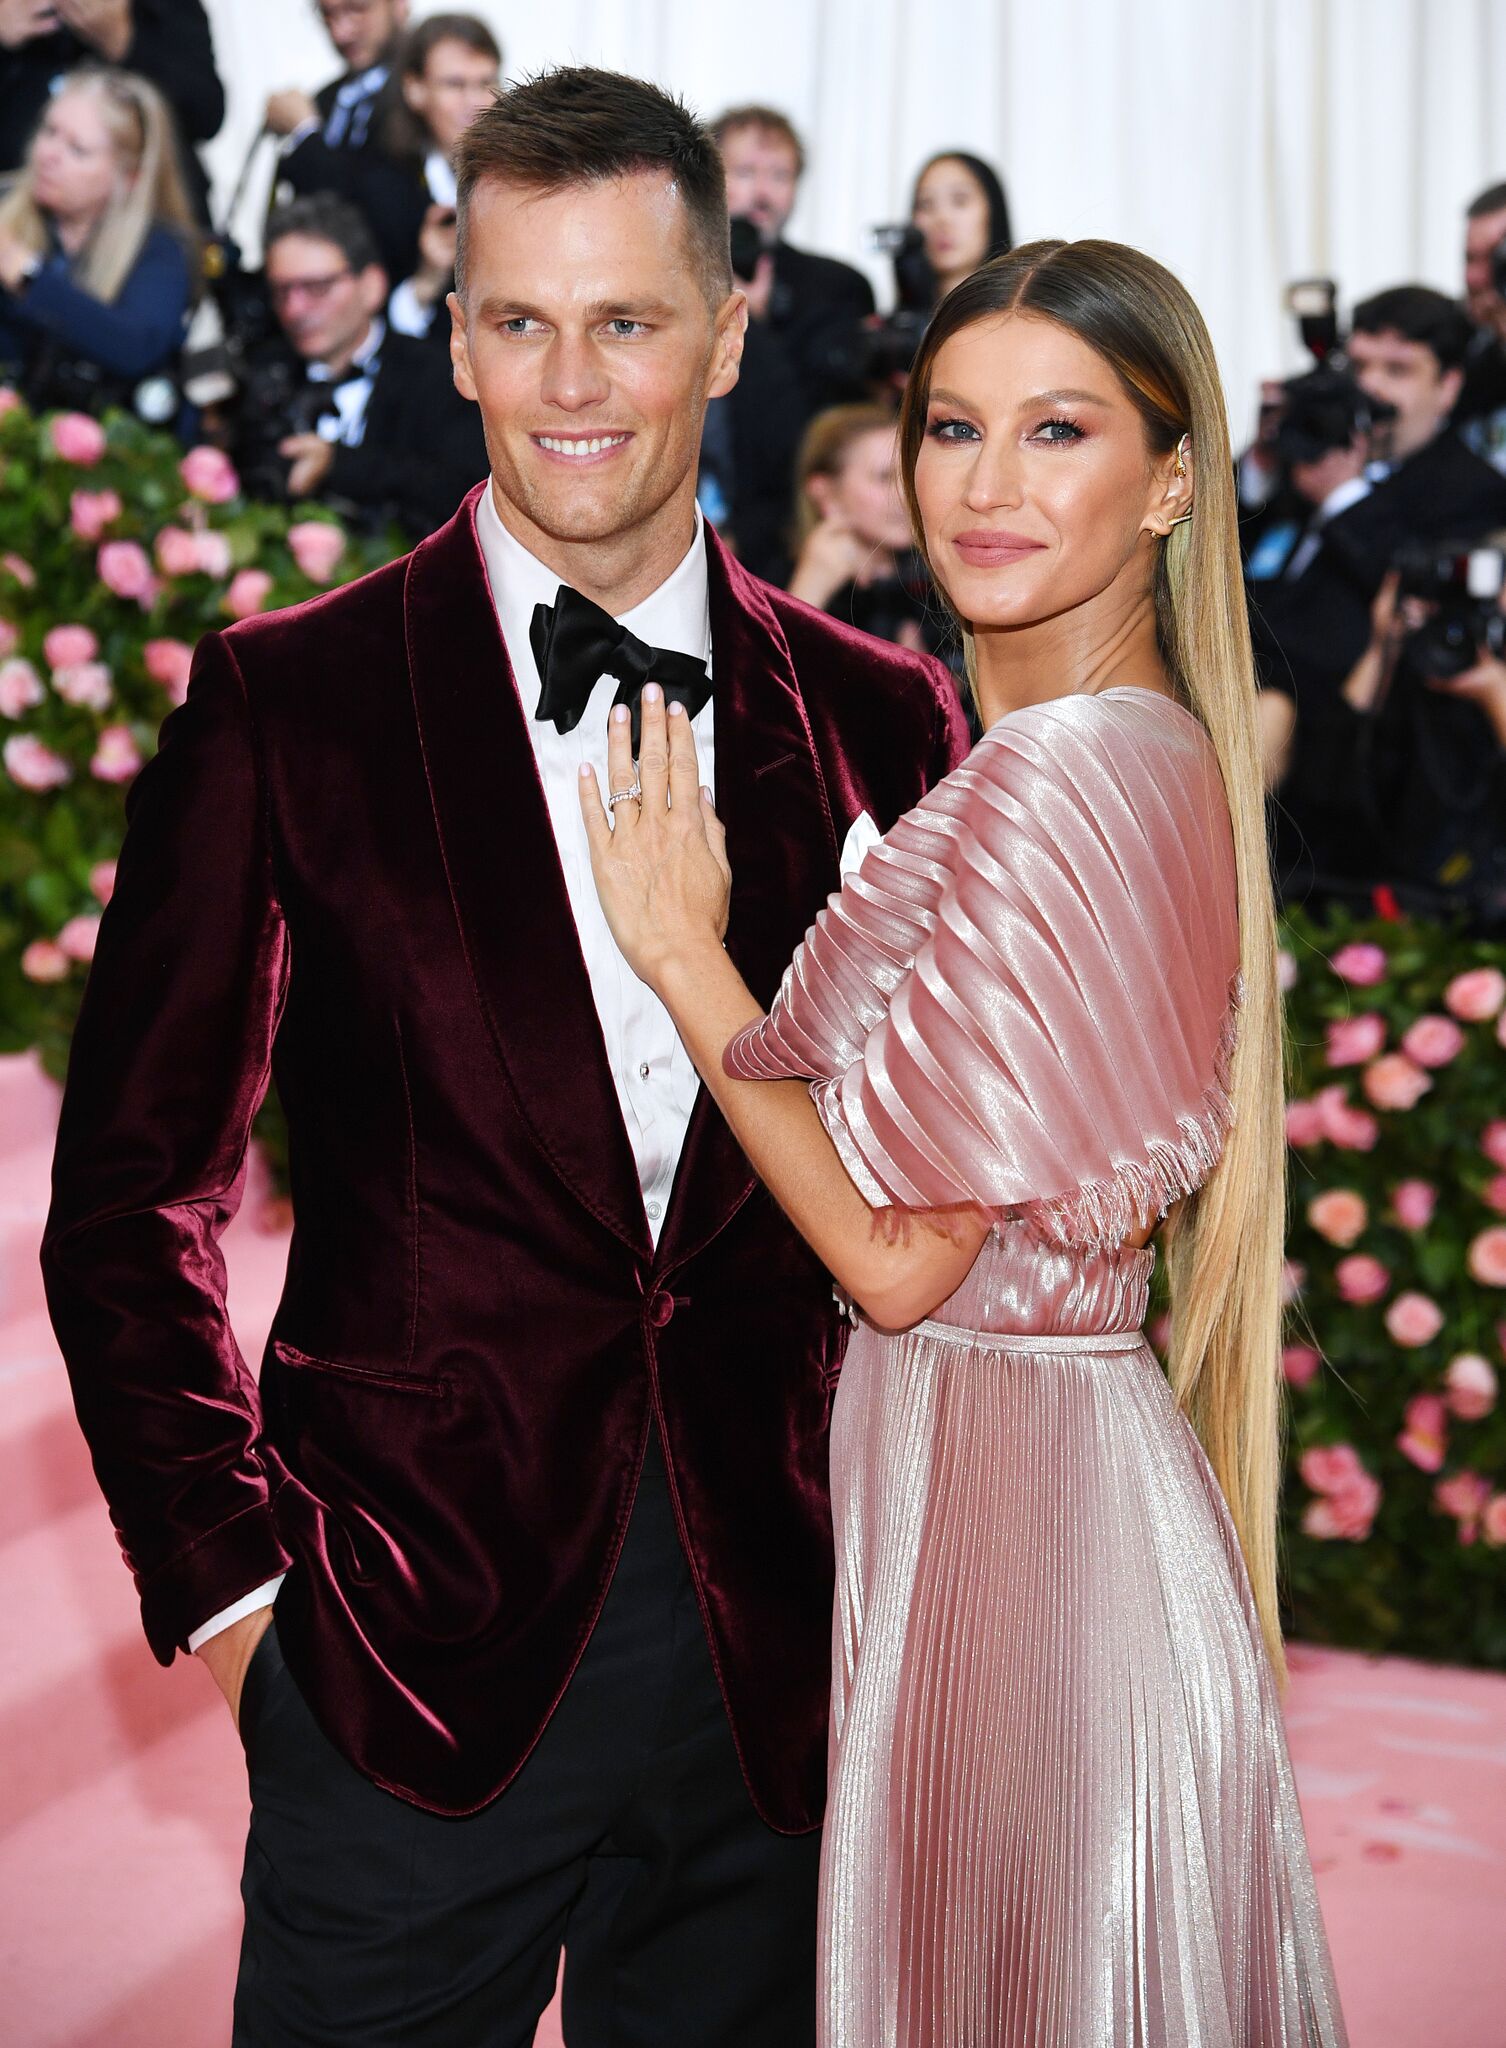  Gisele Bündchen and Tom Brady attend The 2019 Met Gala Celebrating Camp: Notes on Fashion at Metropolitan Museum of Art | Getty Images